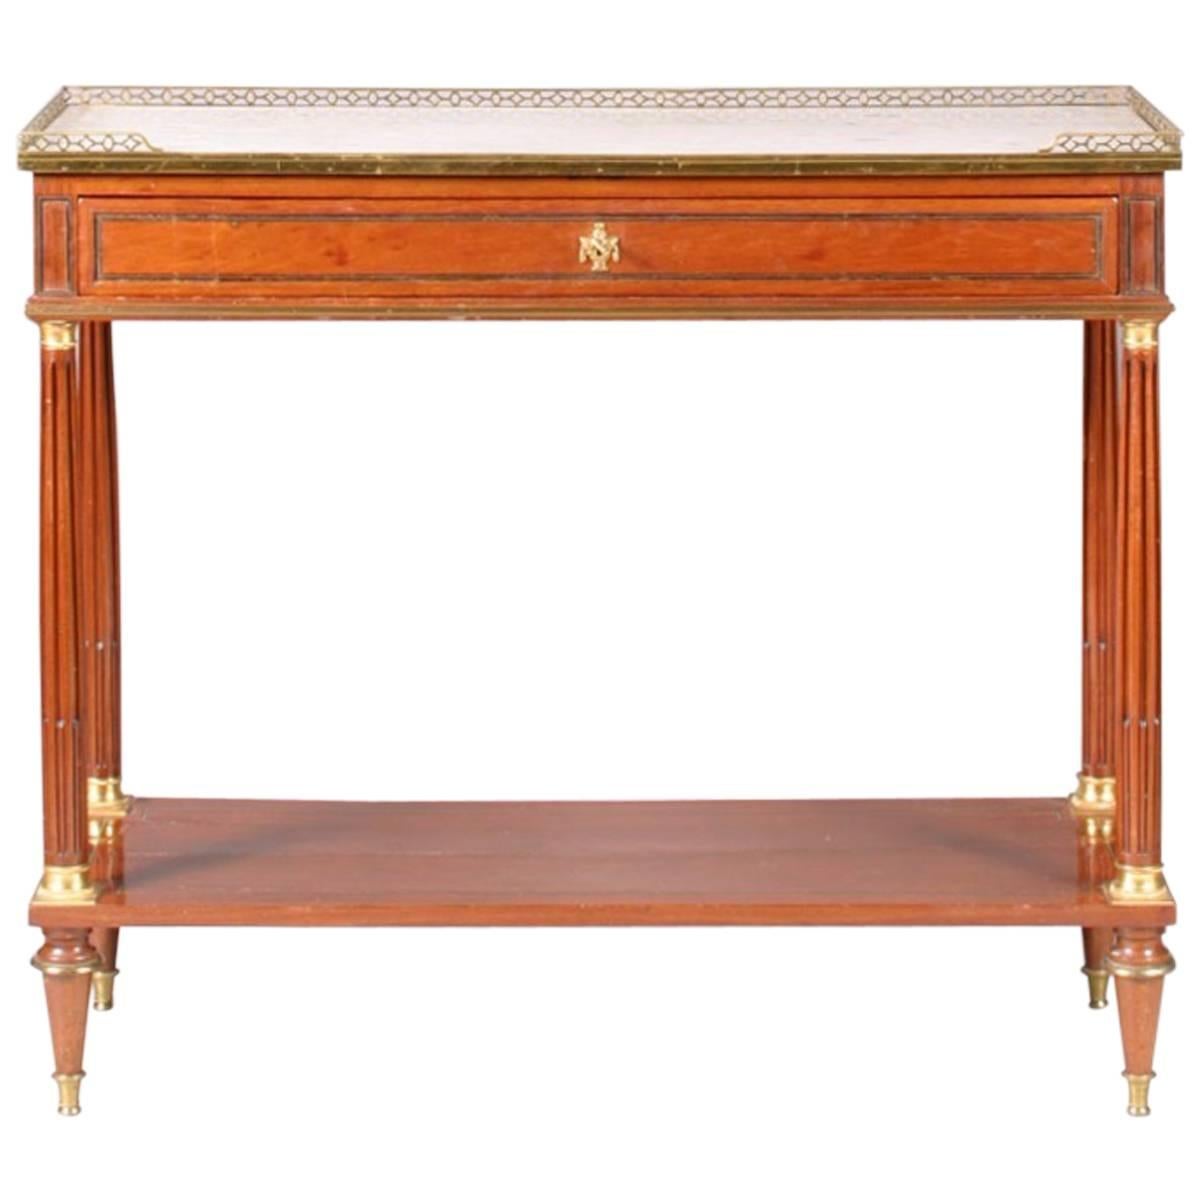 Louis XVI Ormolu-Mounted and Brass Inlaid Console Desserte, Late 18th Century For Sale